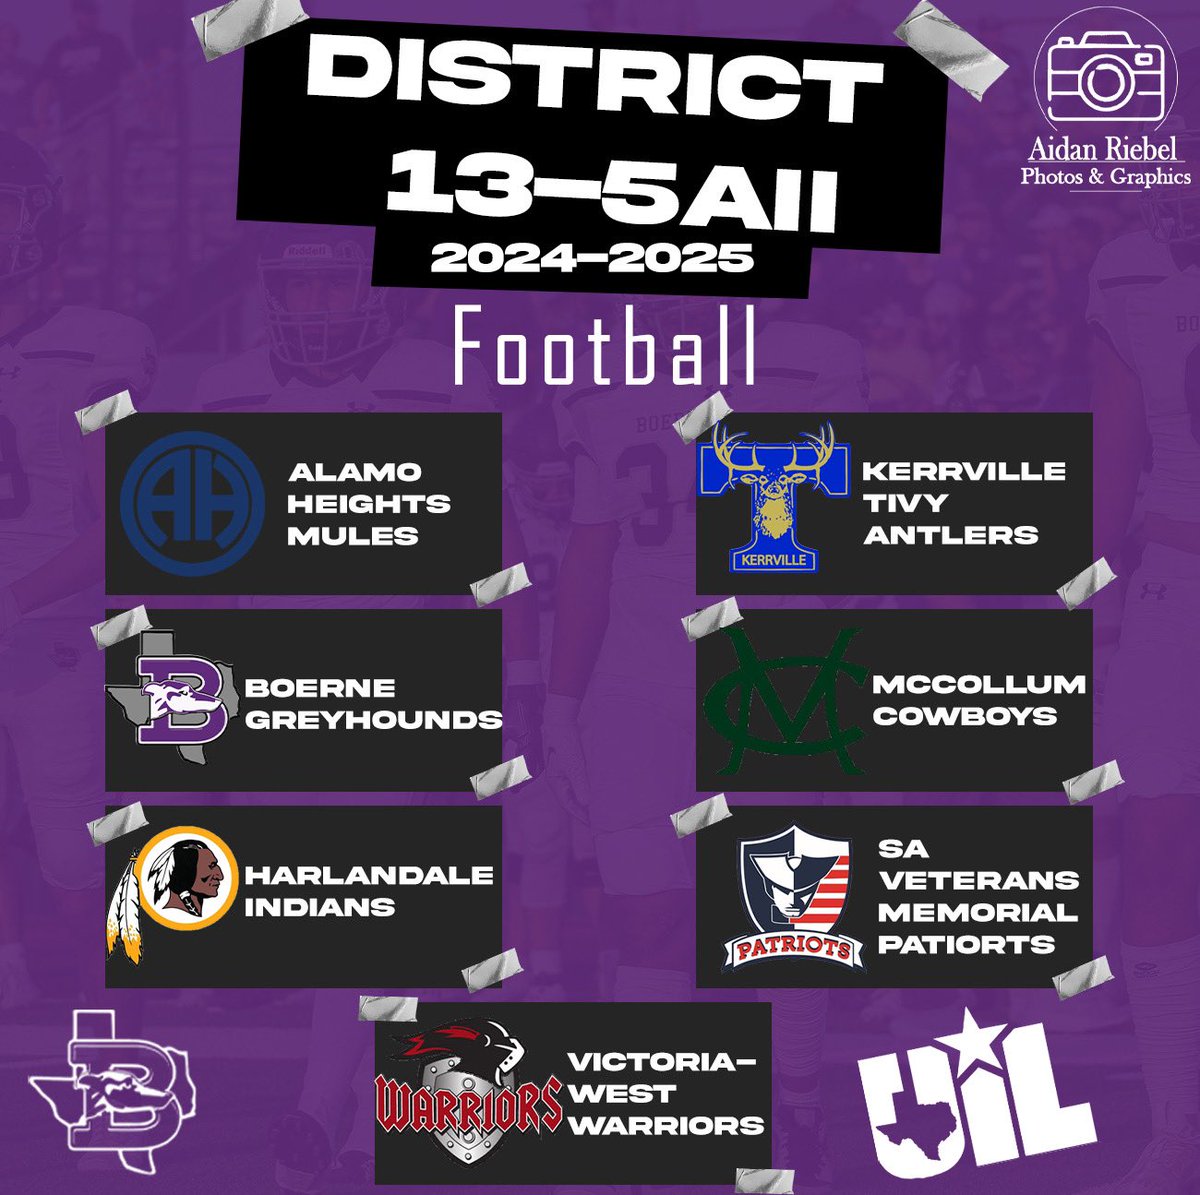 Excited to compete in District 13-5A Division 2 for the next two years! #GoHounds